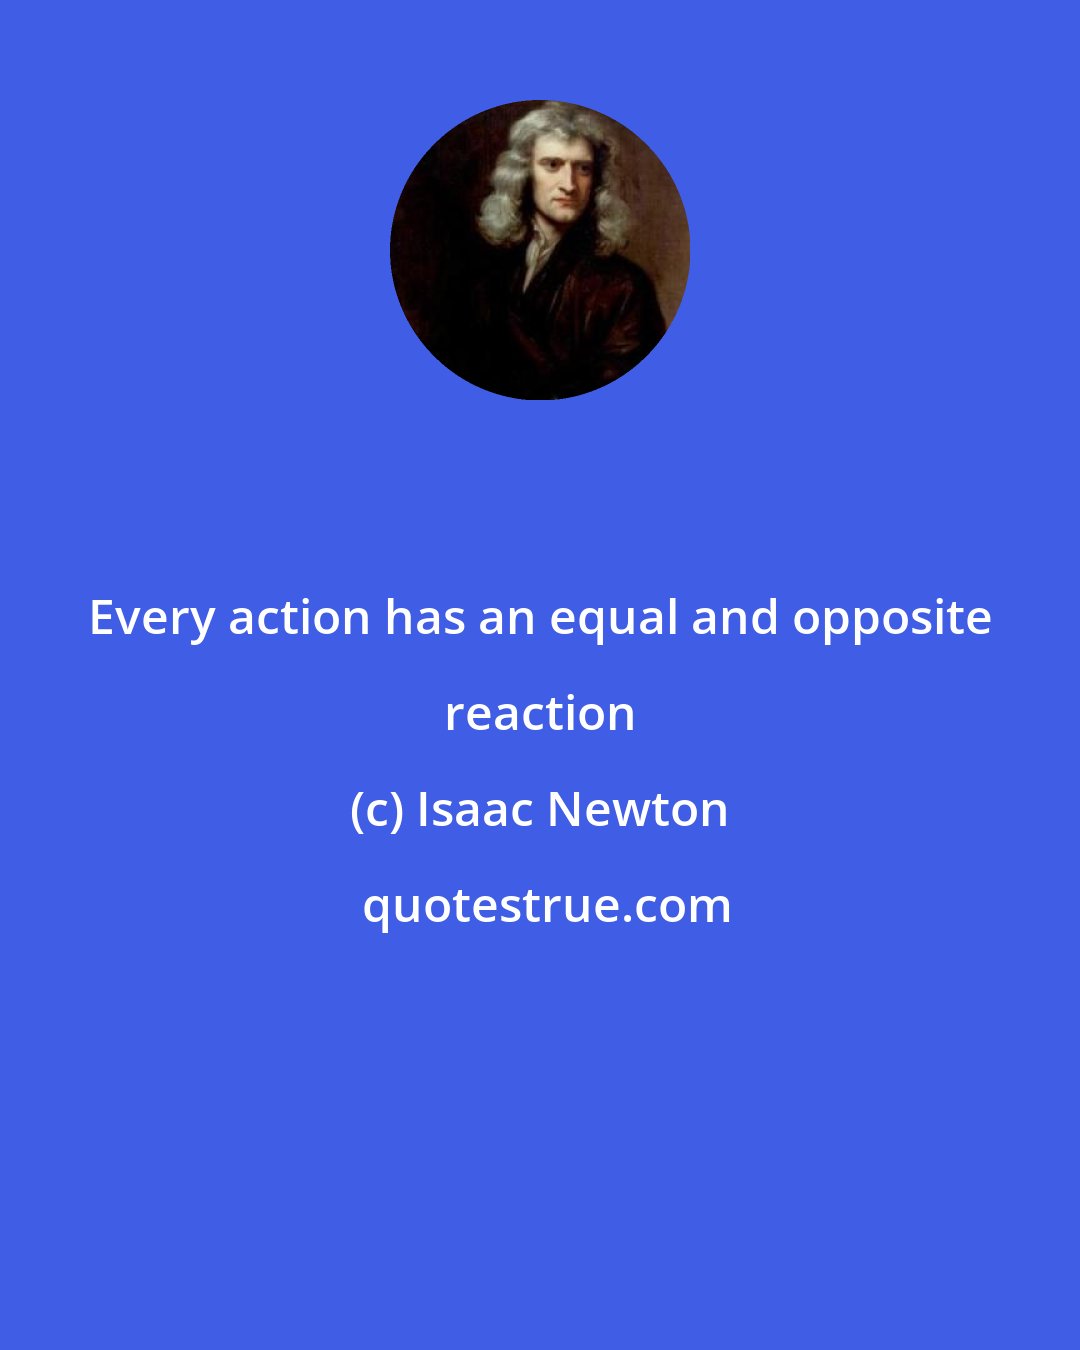 Isaac Newton: Every action has an equal and opposite reaction